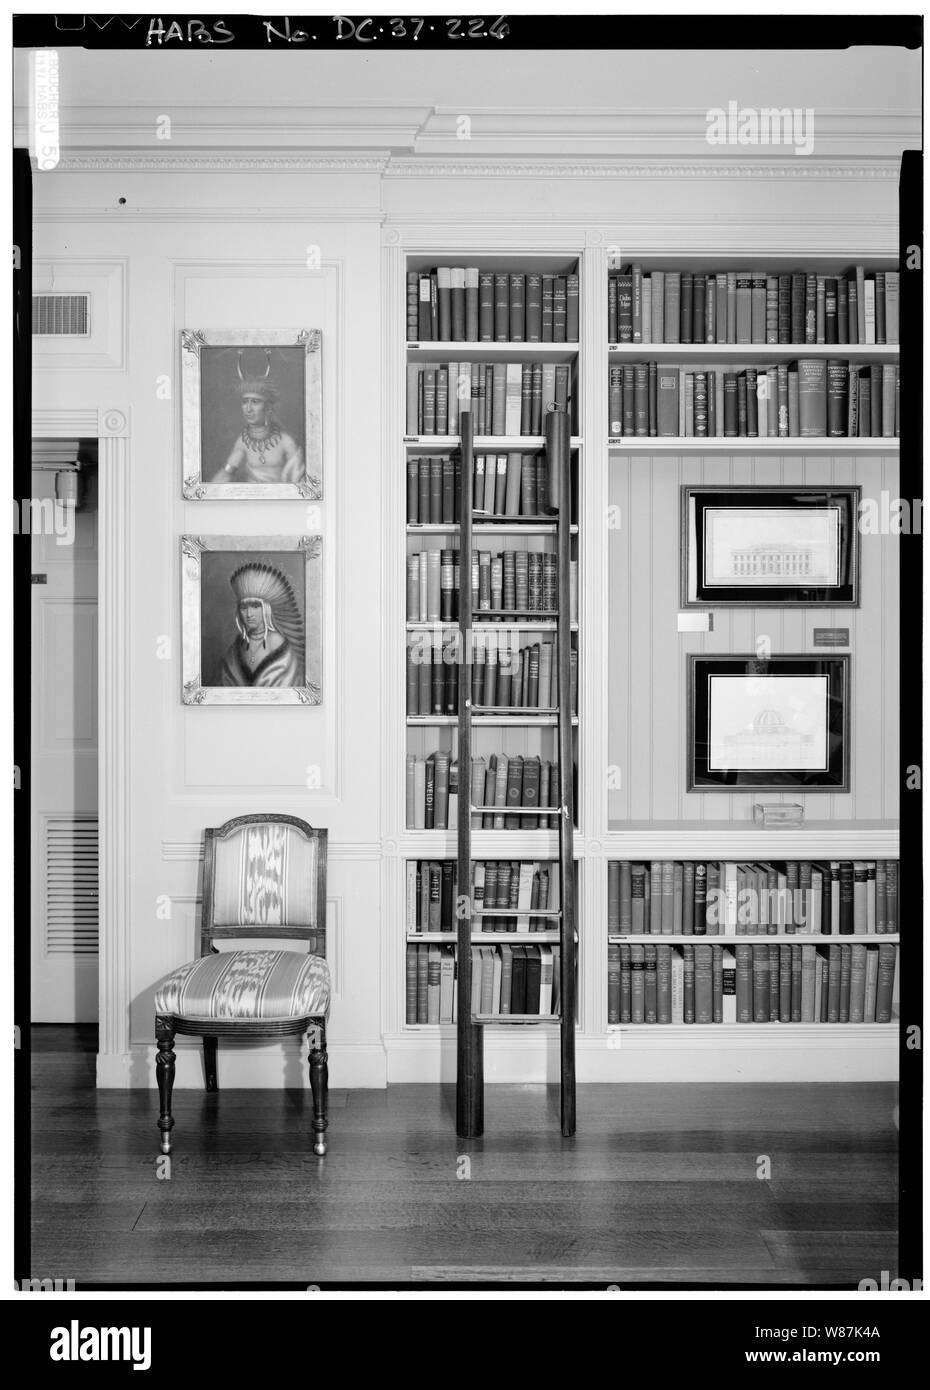 226. G-1 Library; Detail of East Wall Showing Paneling and Bookshelf; 226. G-1 Library; Detail of East Wall Showing Paneling and Bookshelf - White House, 1600 Pennsylvania Avenue, Northwest, Washington, District of Columbia, DC Stock Photo